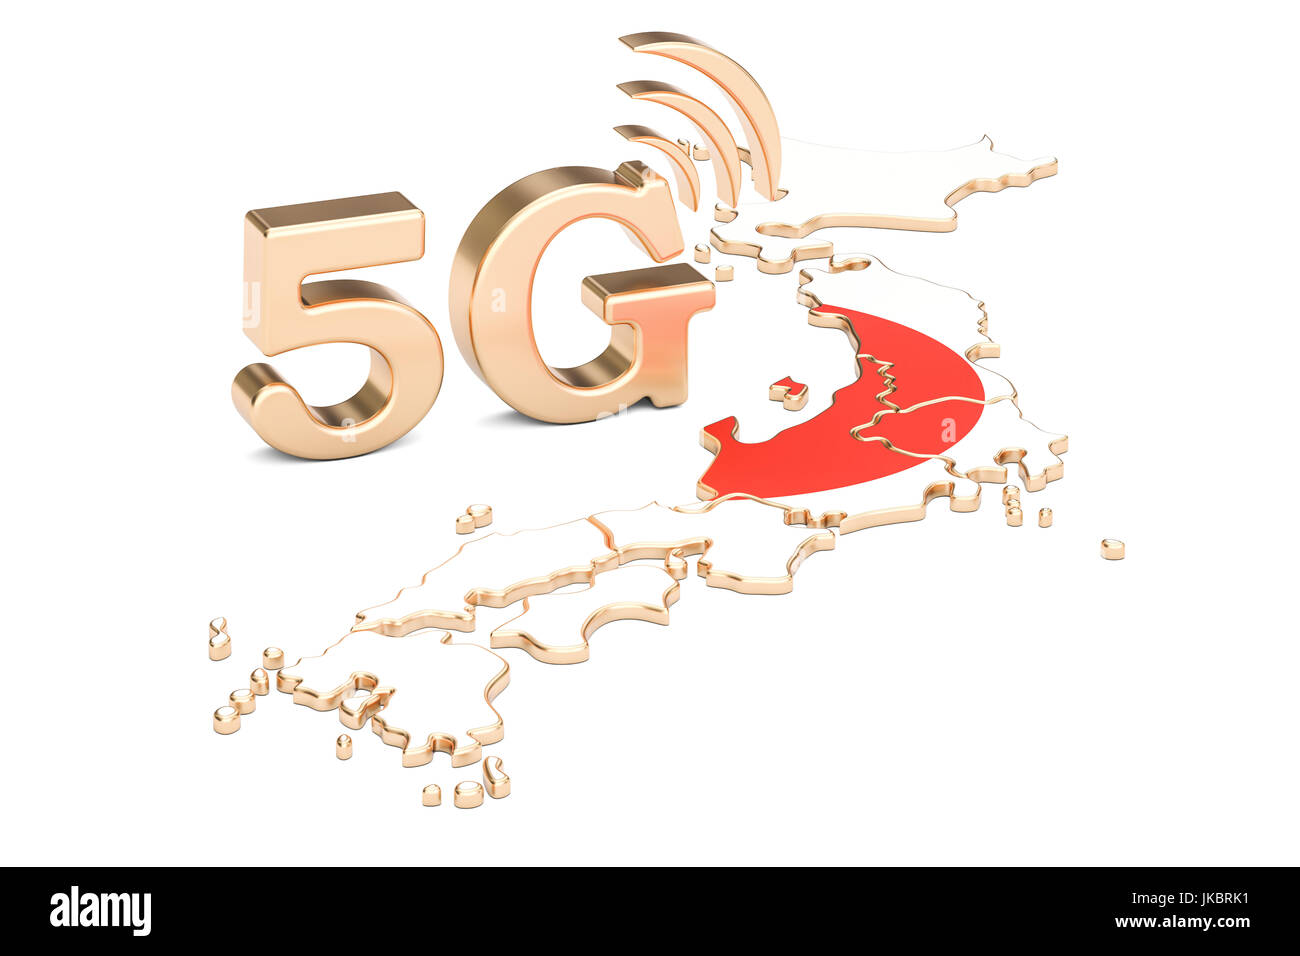 5G in Japan concept, 3D rendering isolated on white background Stock Photo